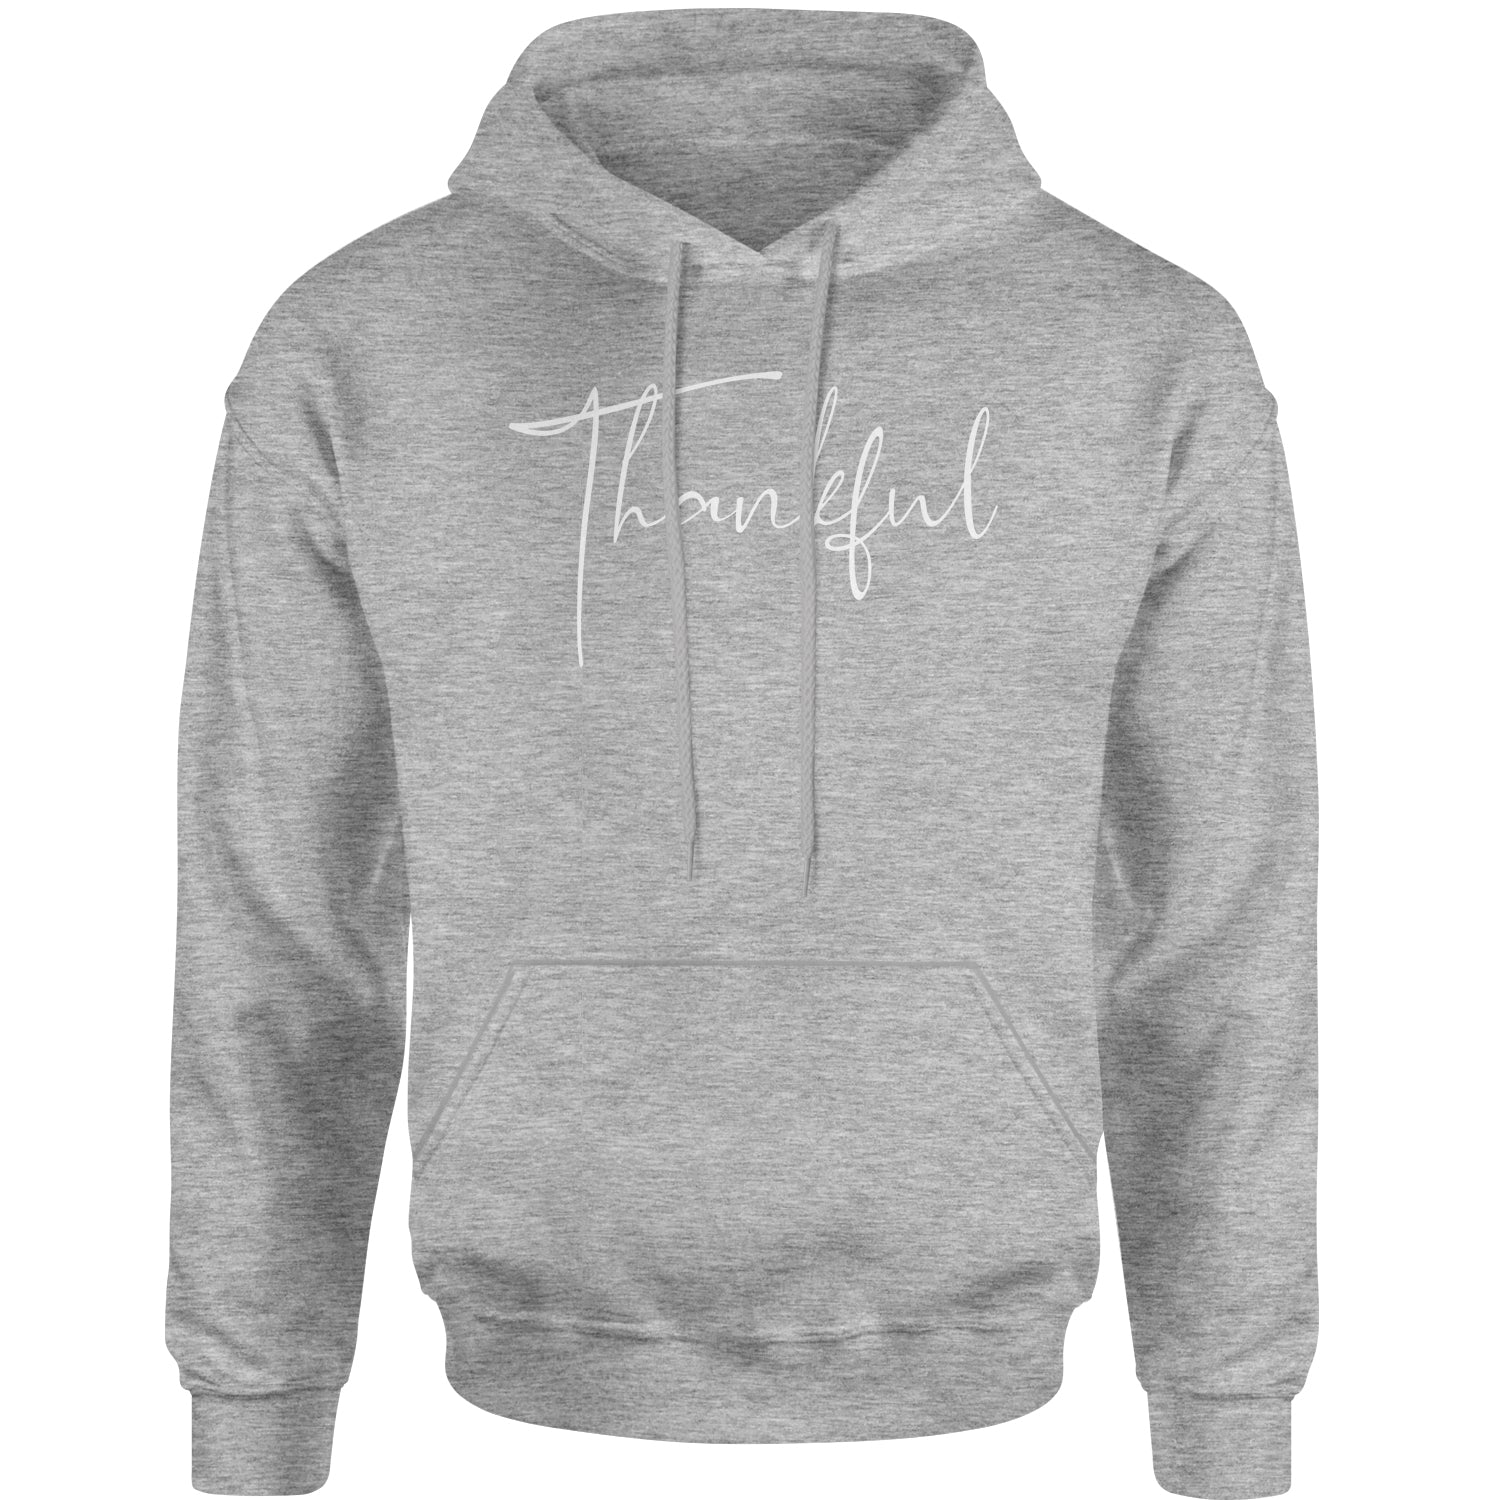 Thankful Adult Hoodie Sweatshirt thanksgiving by Expression Tees